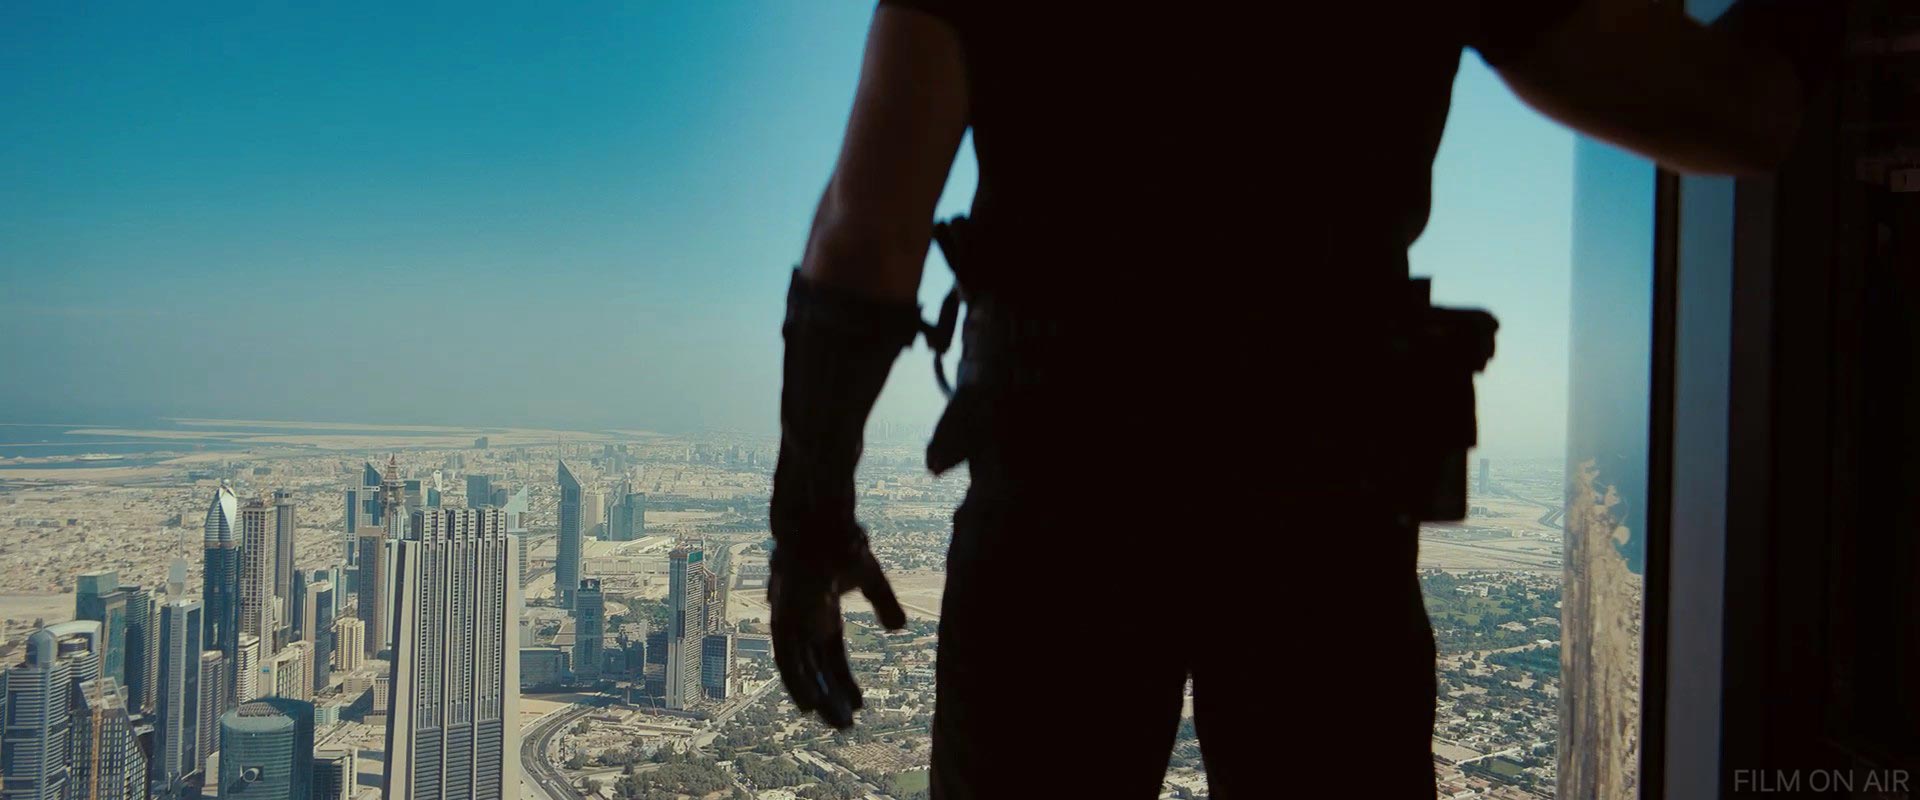 Dubai View
 in Mission: Impossible 4 - Ghost Protocol in Mission: Impossible - Ghost Protocol